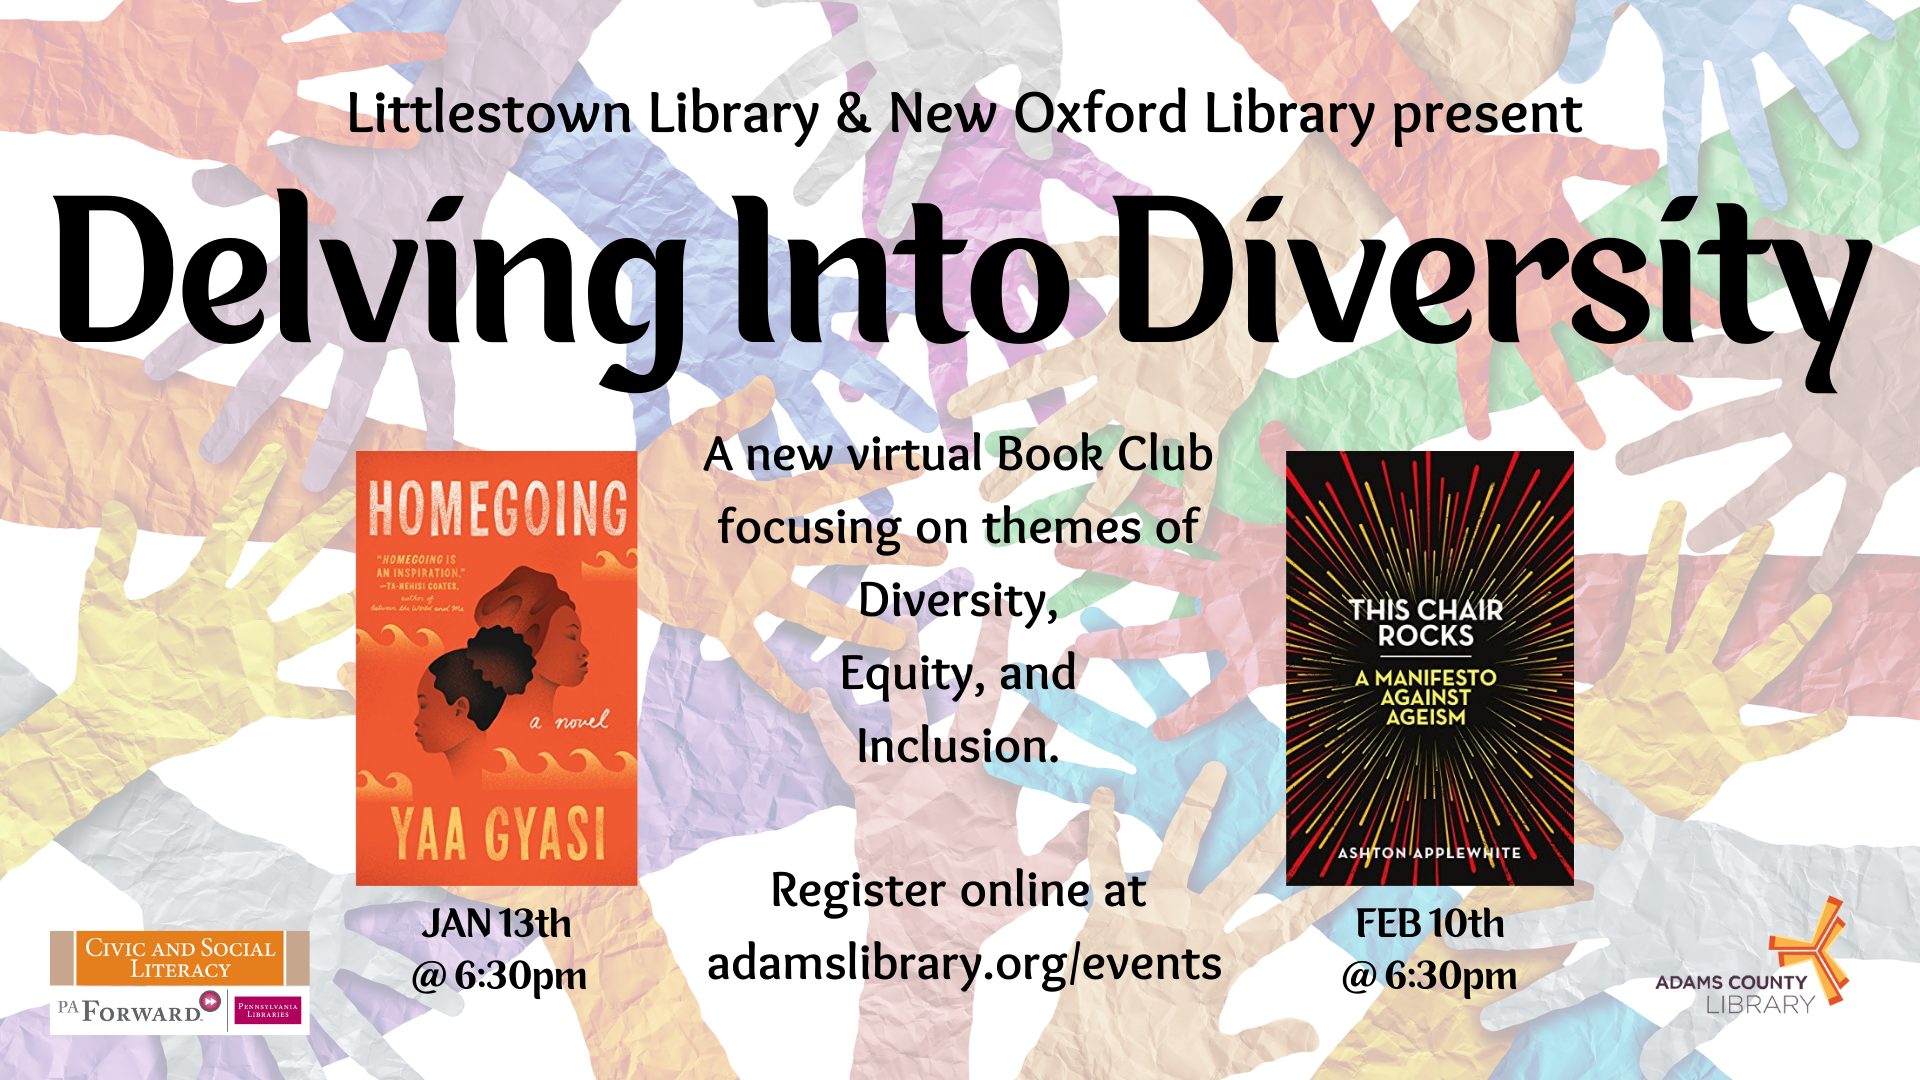 Join us on the second Thursday of the month for Delving Into Diversity, a new virtual book club focusing on themes of diversity, equity, and inclusion.